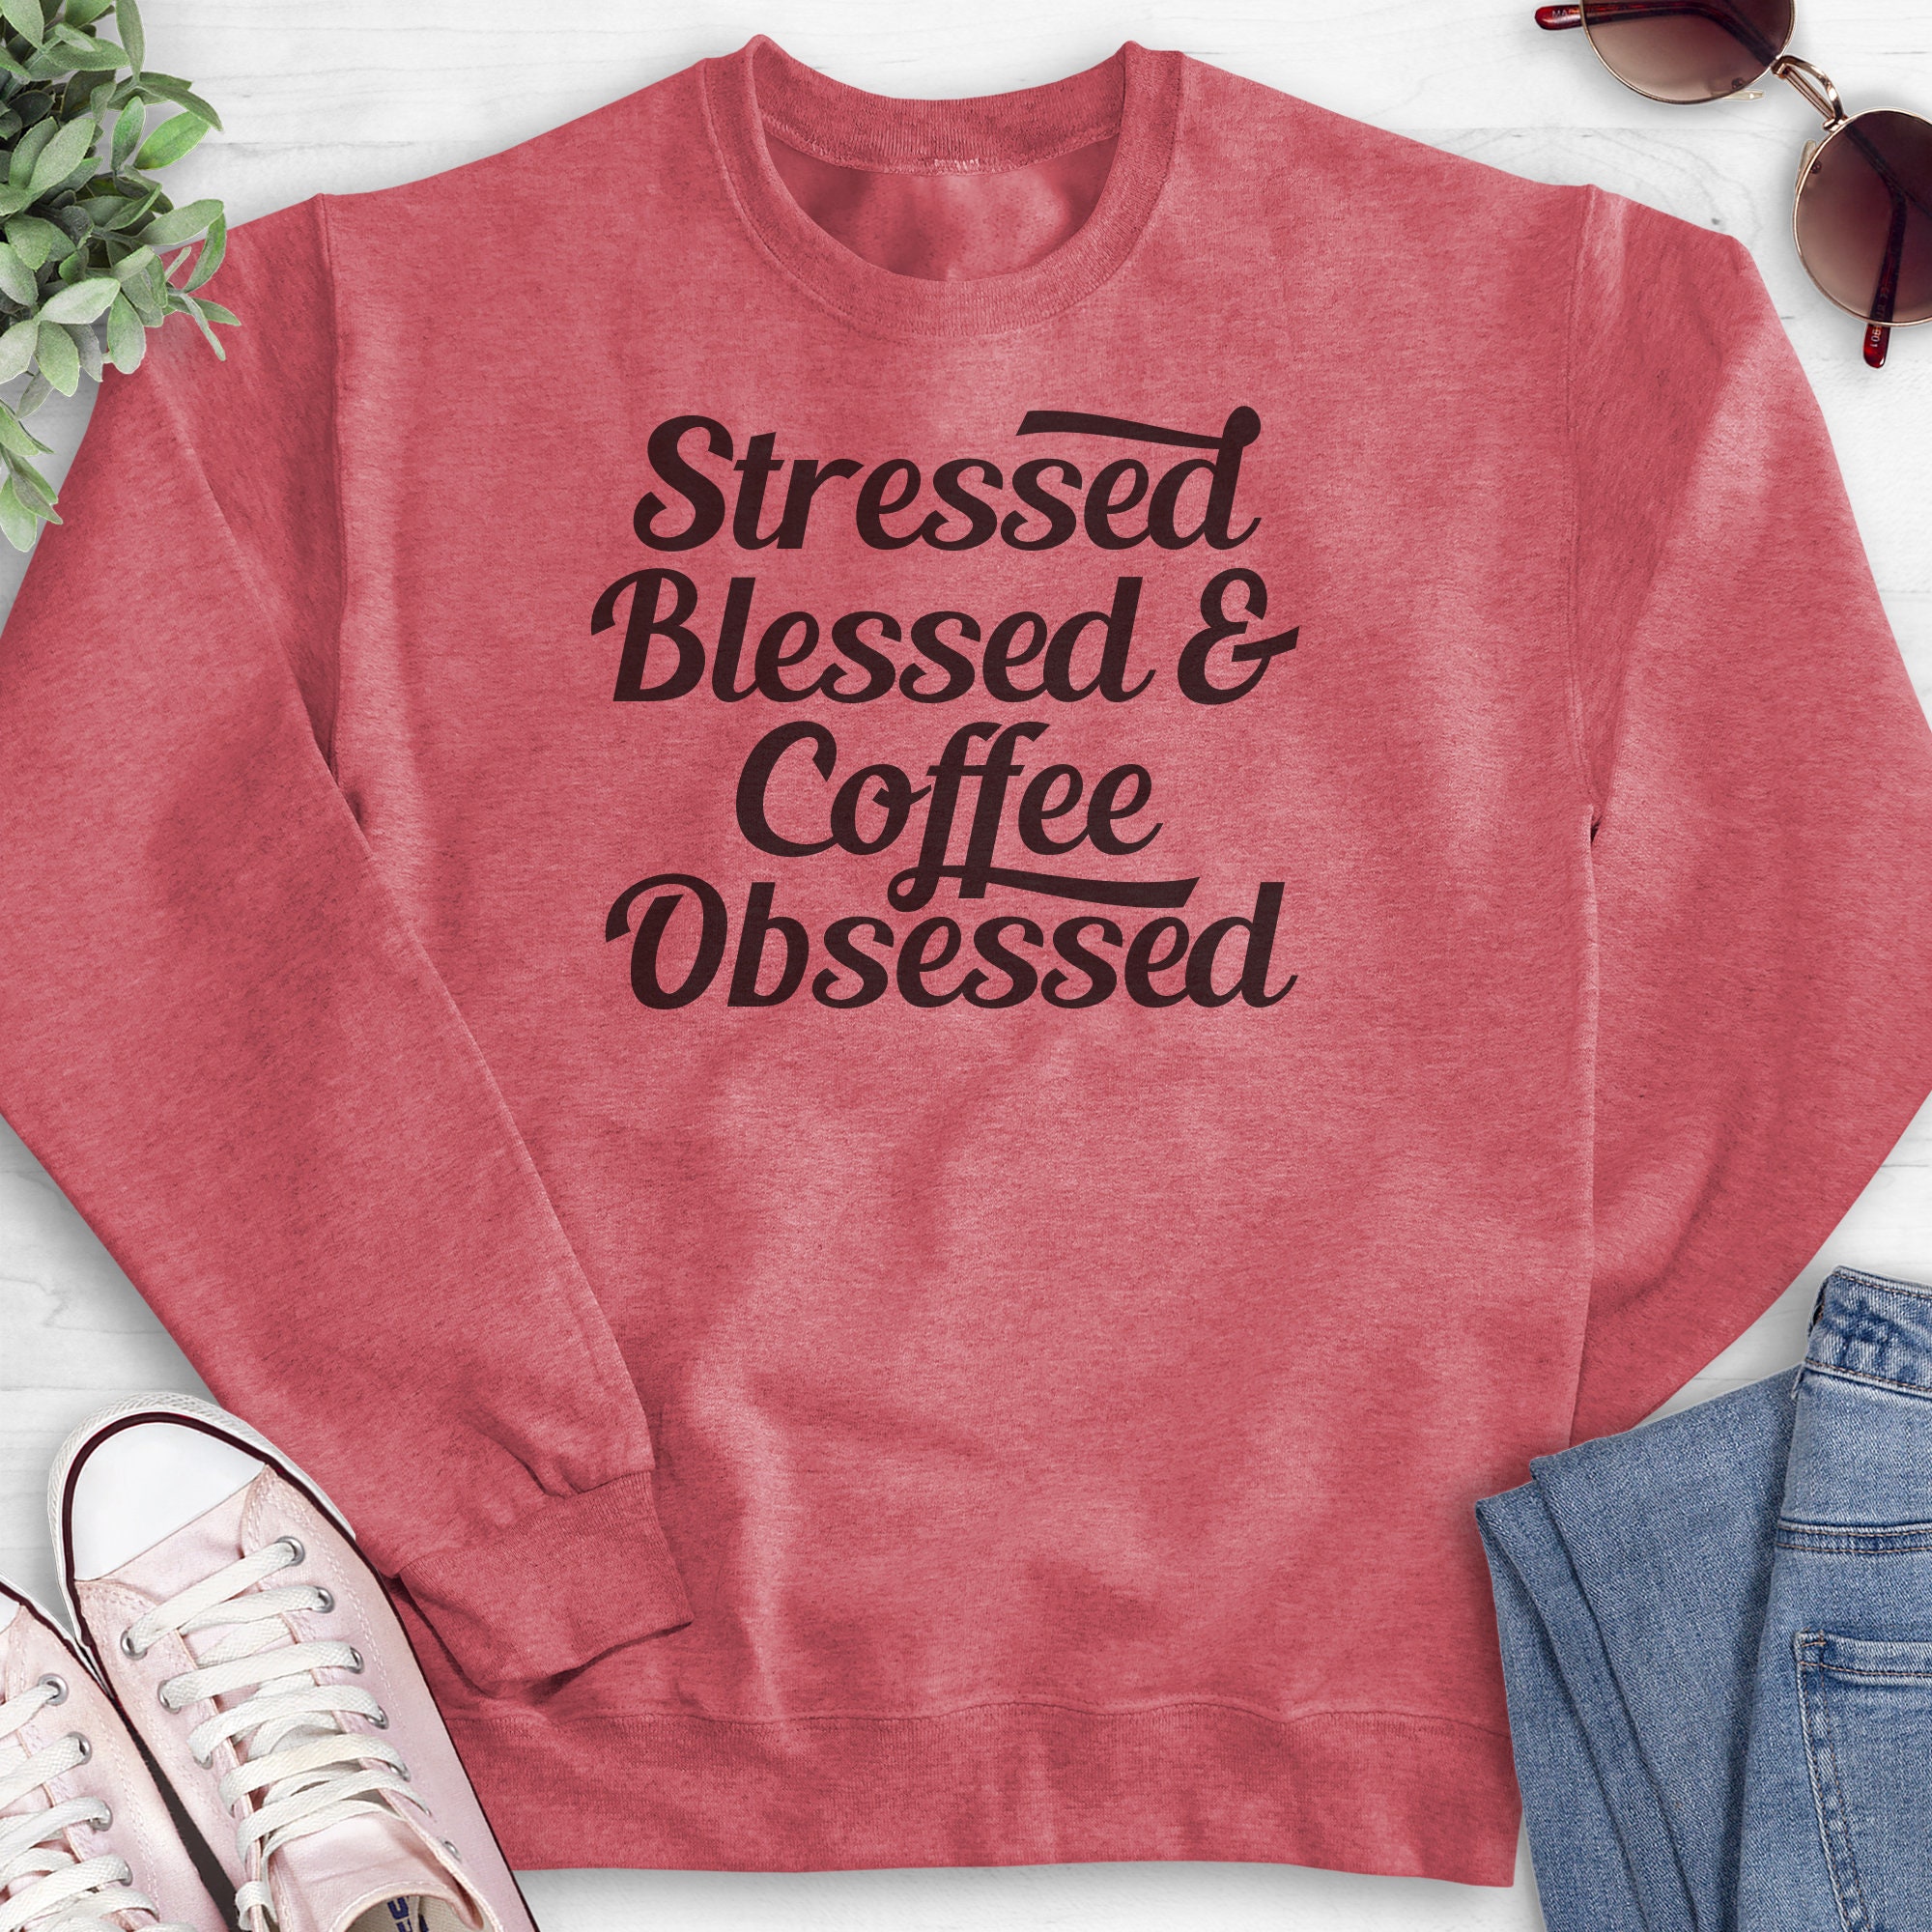 NOFO_01998 and Coffee Obsessed Hooded Sweatshirt Stressed Blessed